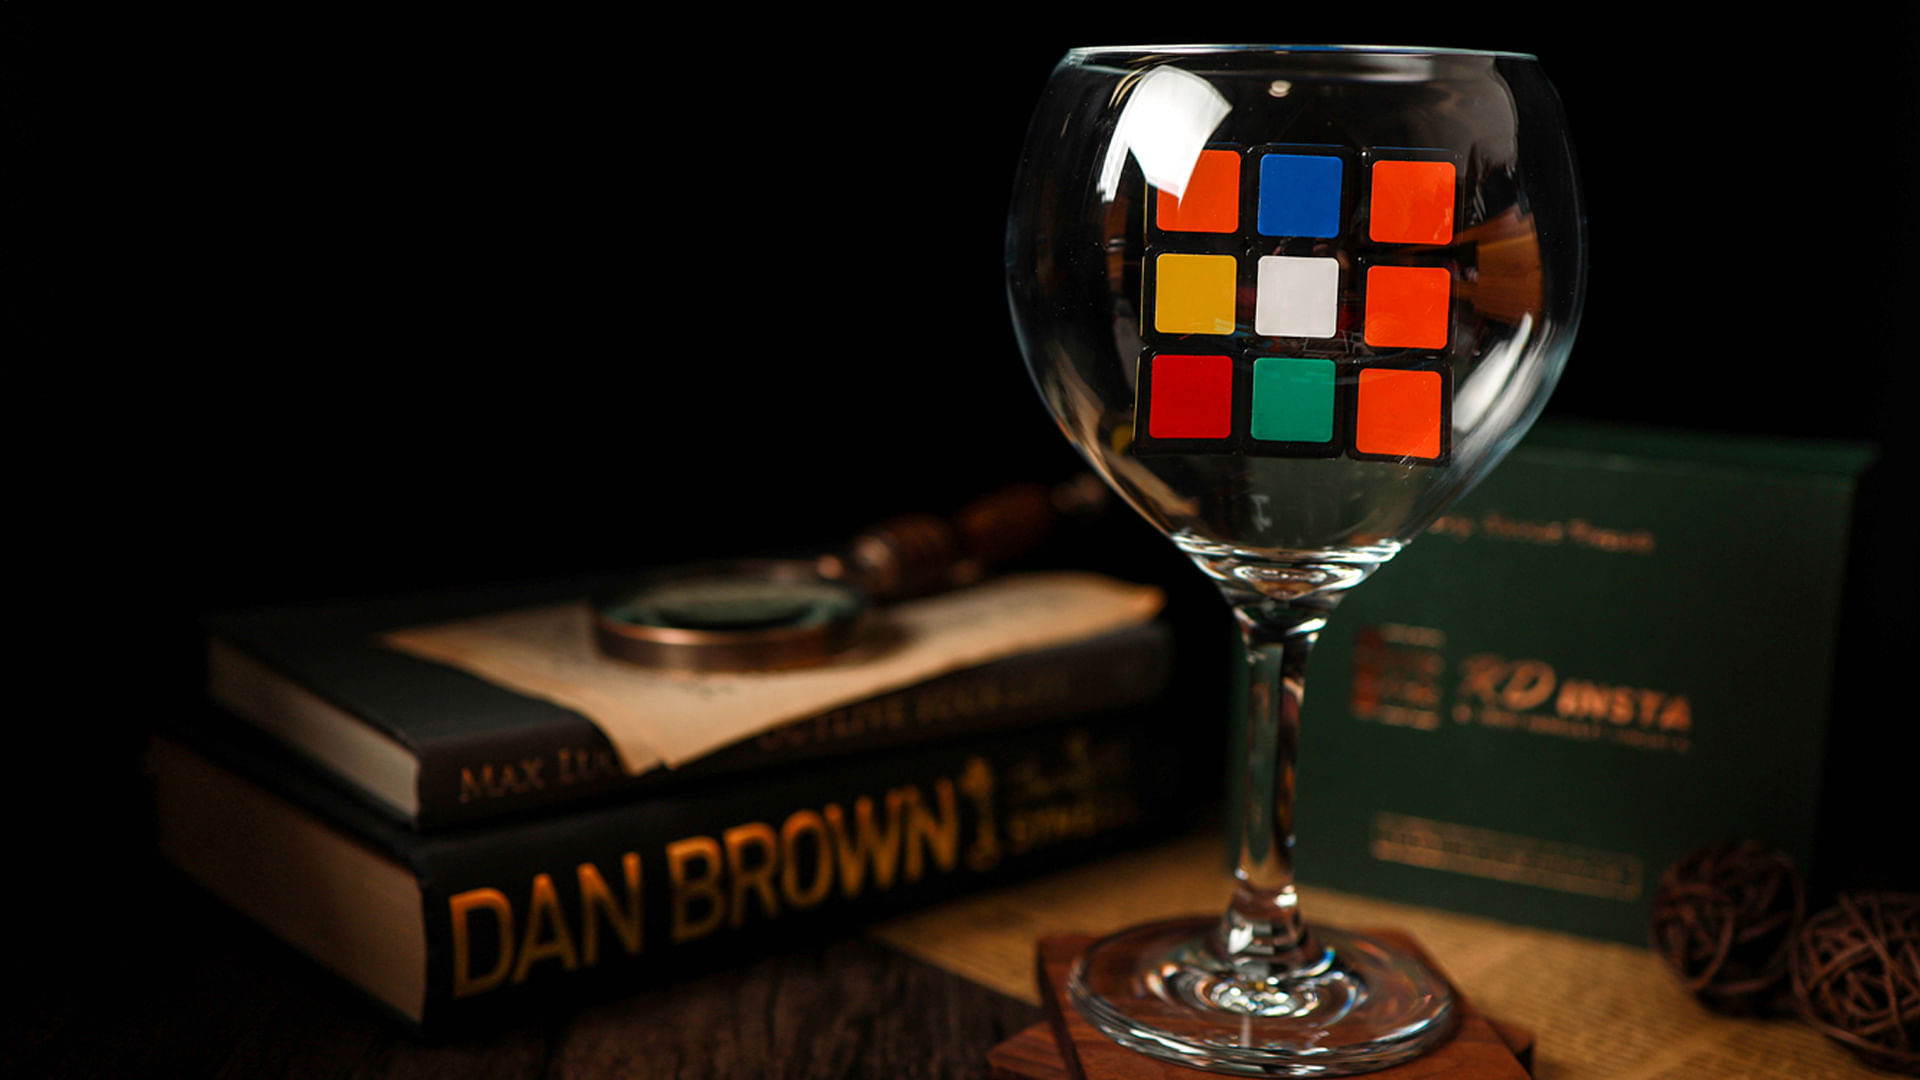 unsolved rubik's cube sits in a wine glass on a table